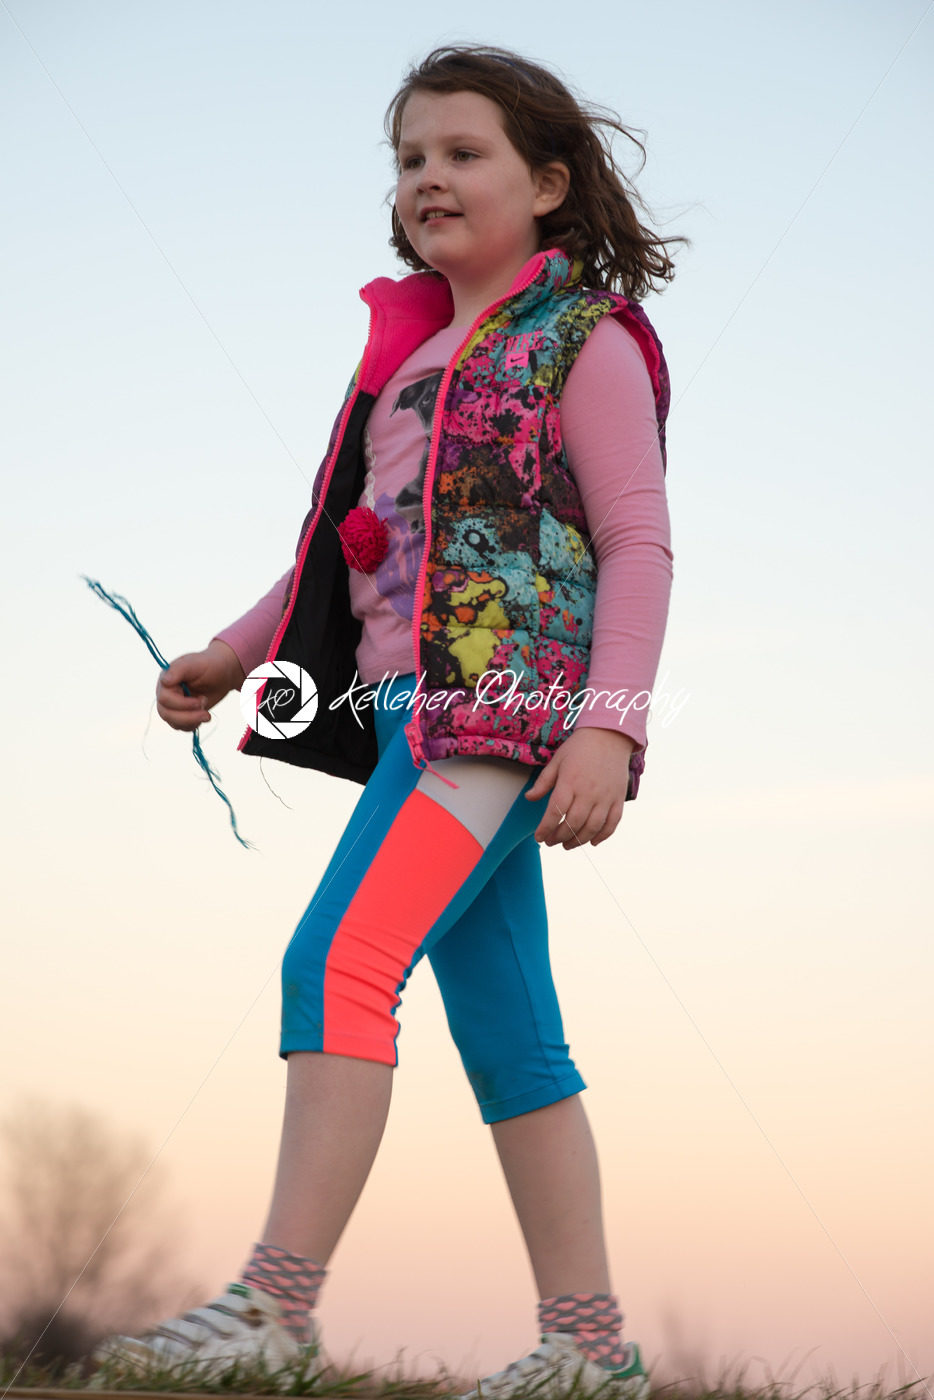 Beautiful young girl outside walking and smiling at sunset golden hour - Kelleher Photography Store